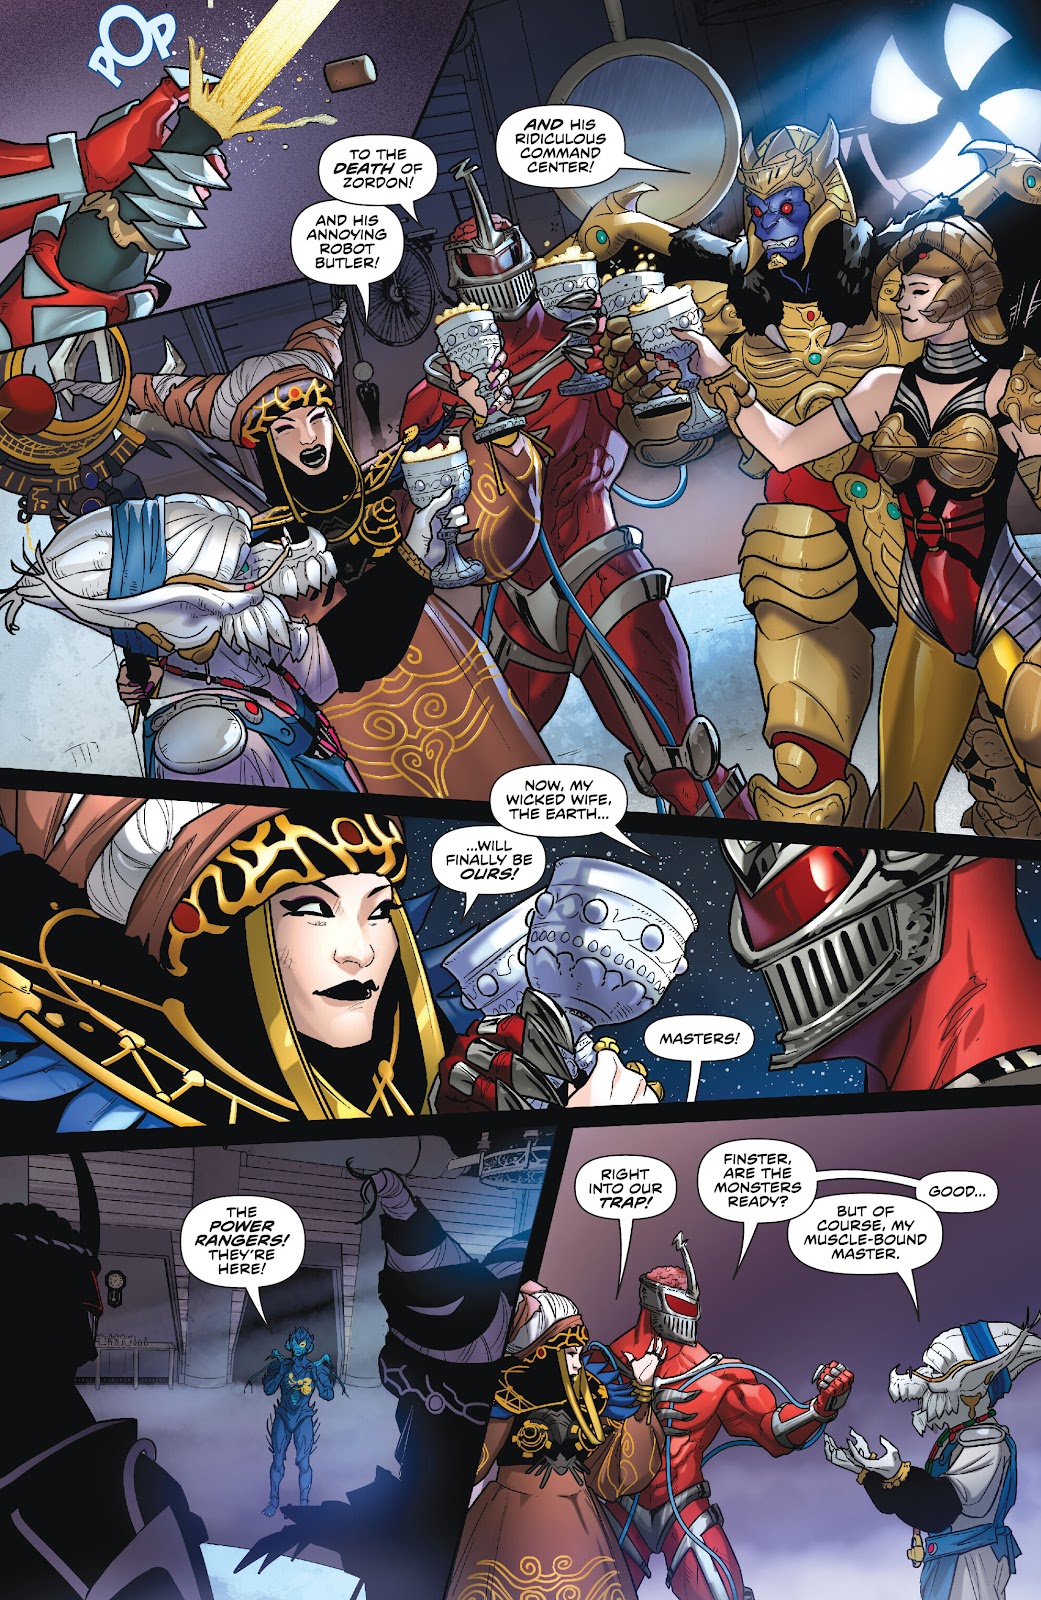 Mighty Morphin Power Rangers: The Return issue 2 - Page 3